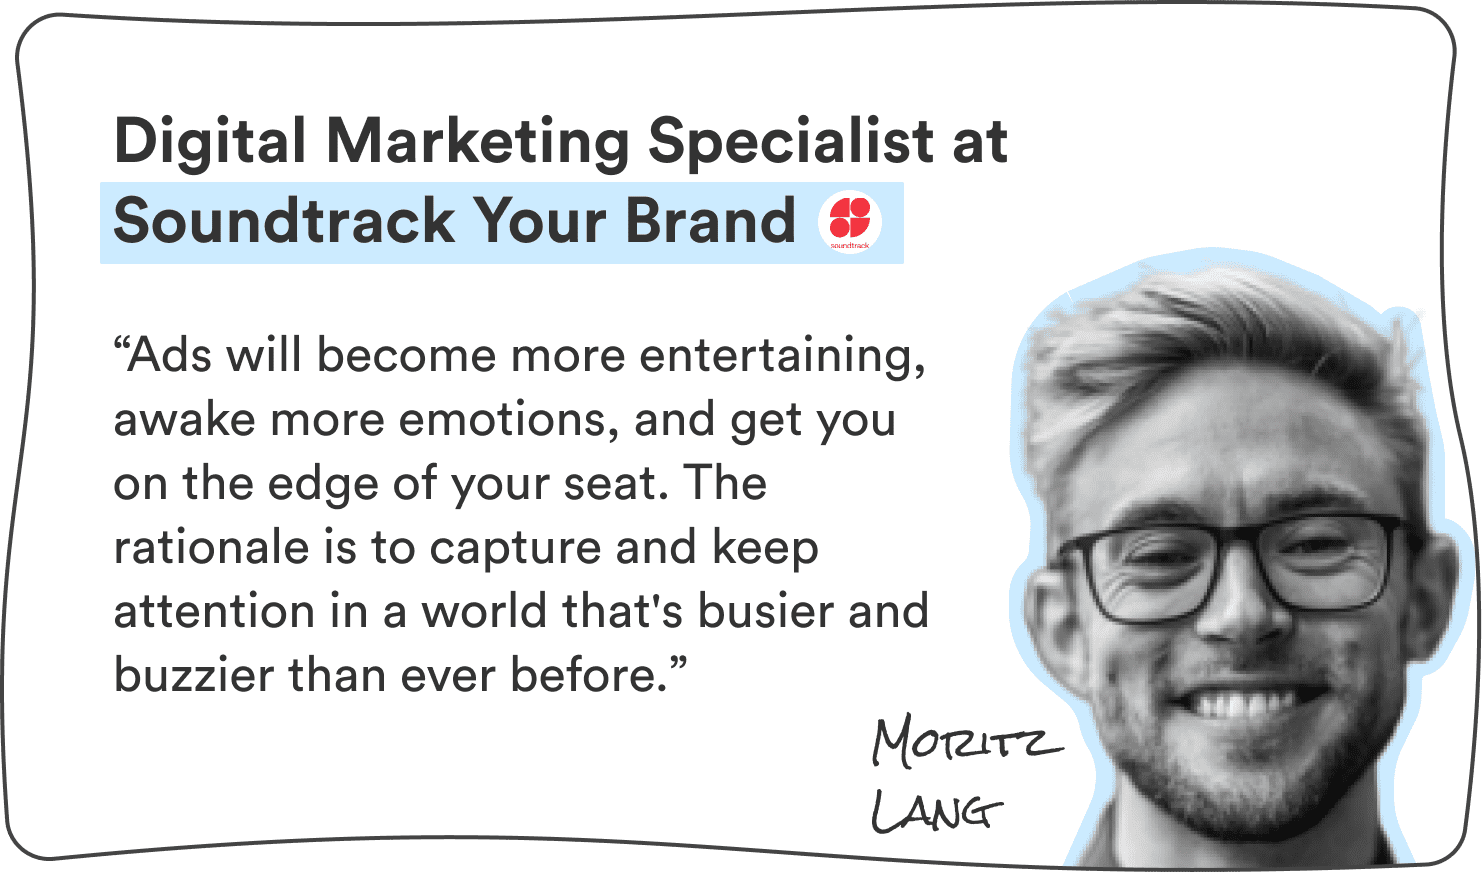 Moritz Lang, Digital Marketing Specialist at Soundtrack Your Brand: “Ads will become more entertaining, awake more emotions, and get you on the edge of your seat. The rationale is to capture and keep attention in a world that’s busier and buzzier than ever before.”